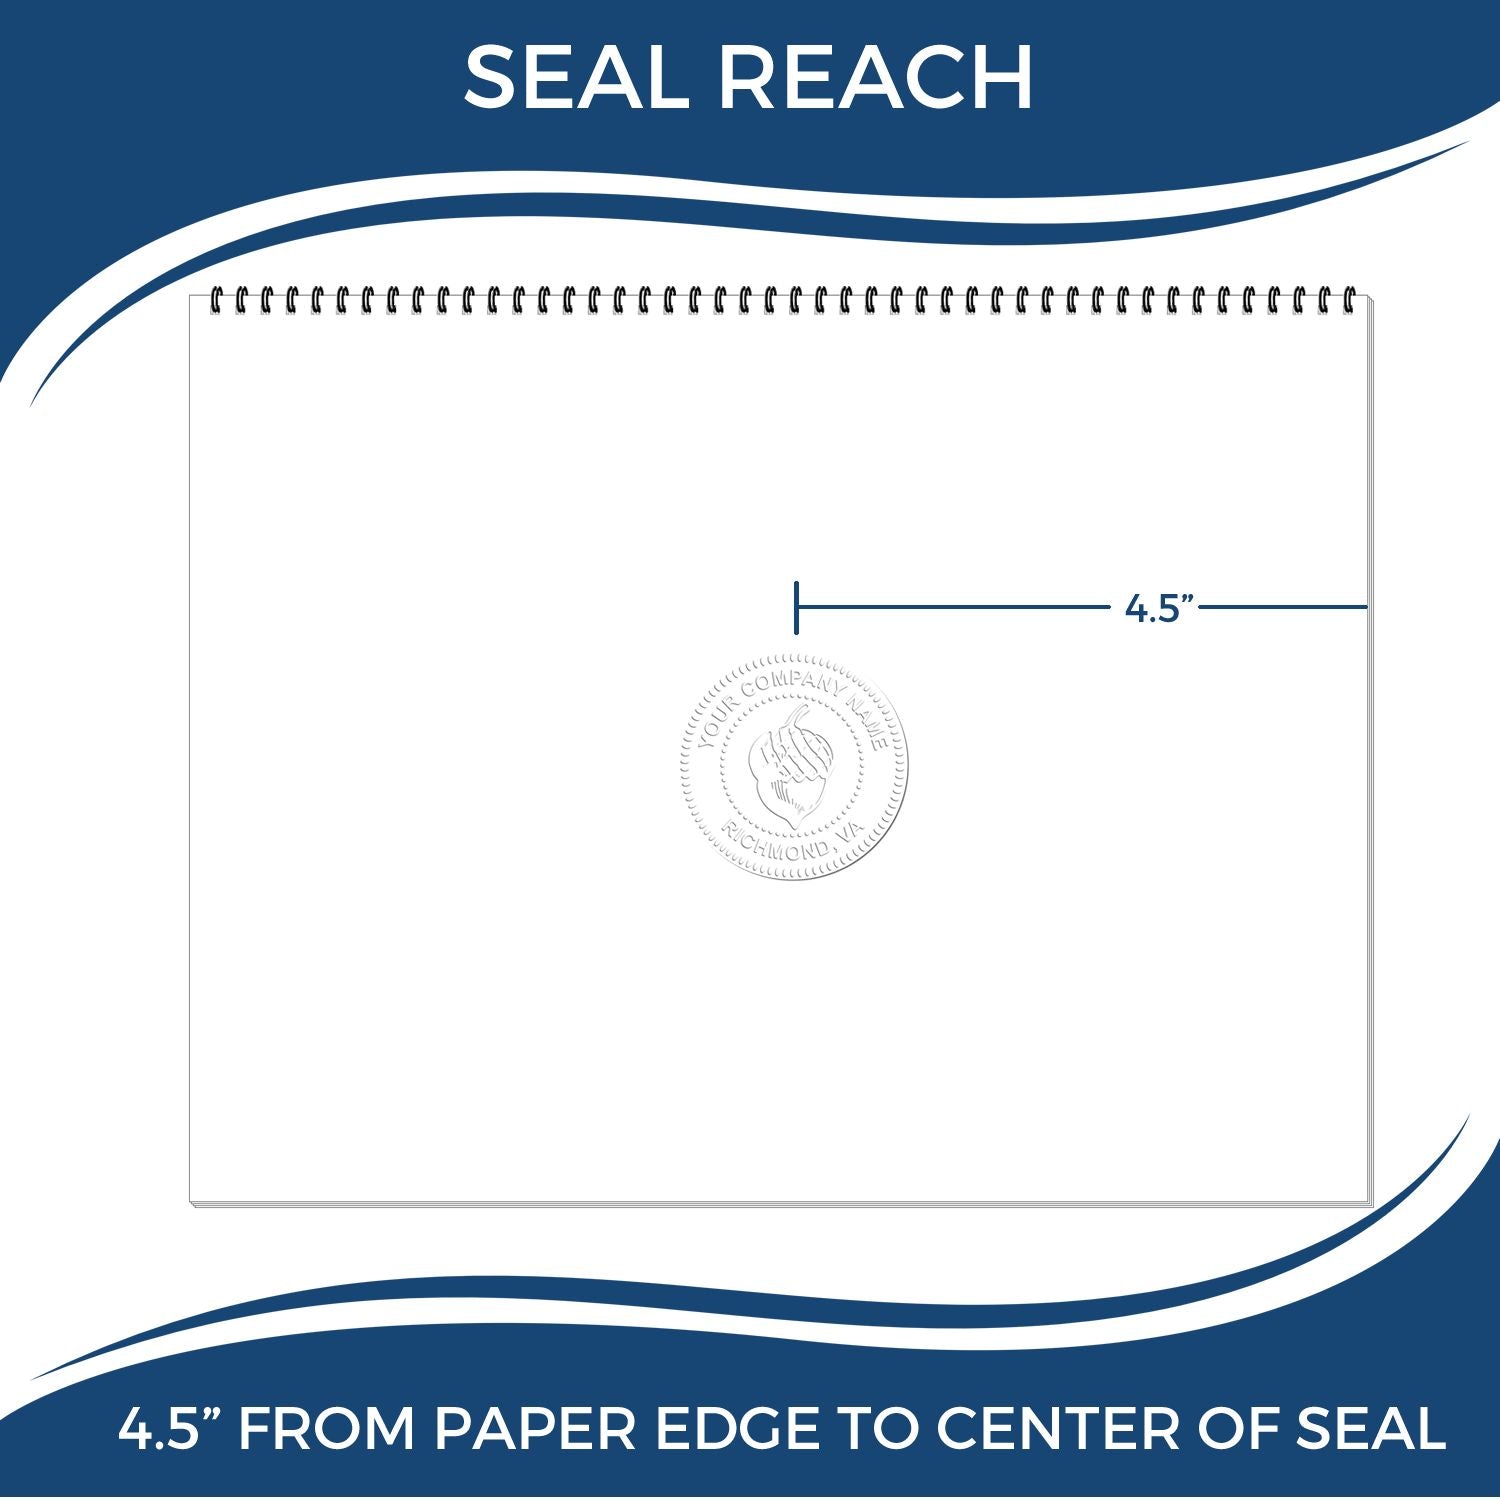 An infographic showing the seal reach which is represented by a ruler and a miniature seal image of the State of Pennsylvania Extended Long Reach Geologist Seal